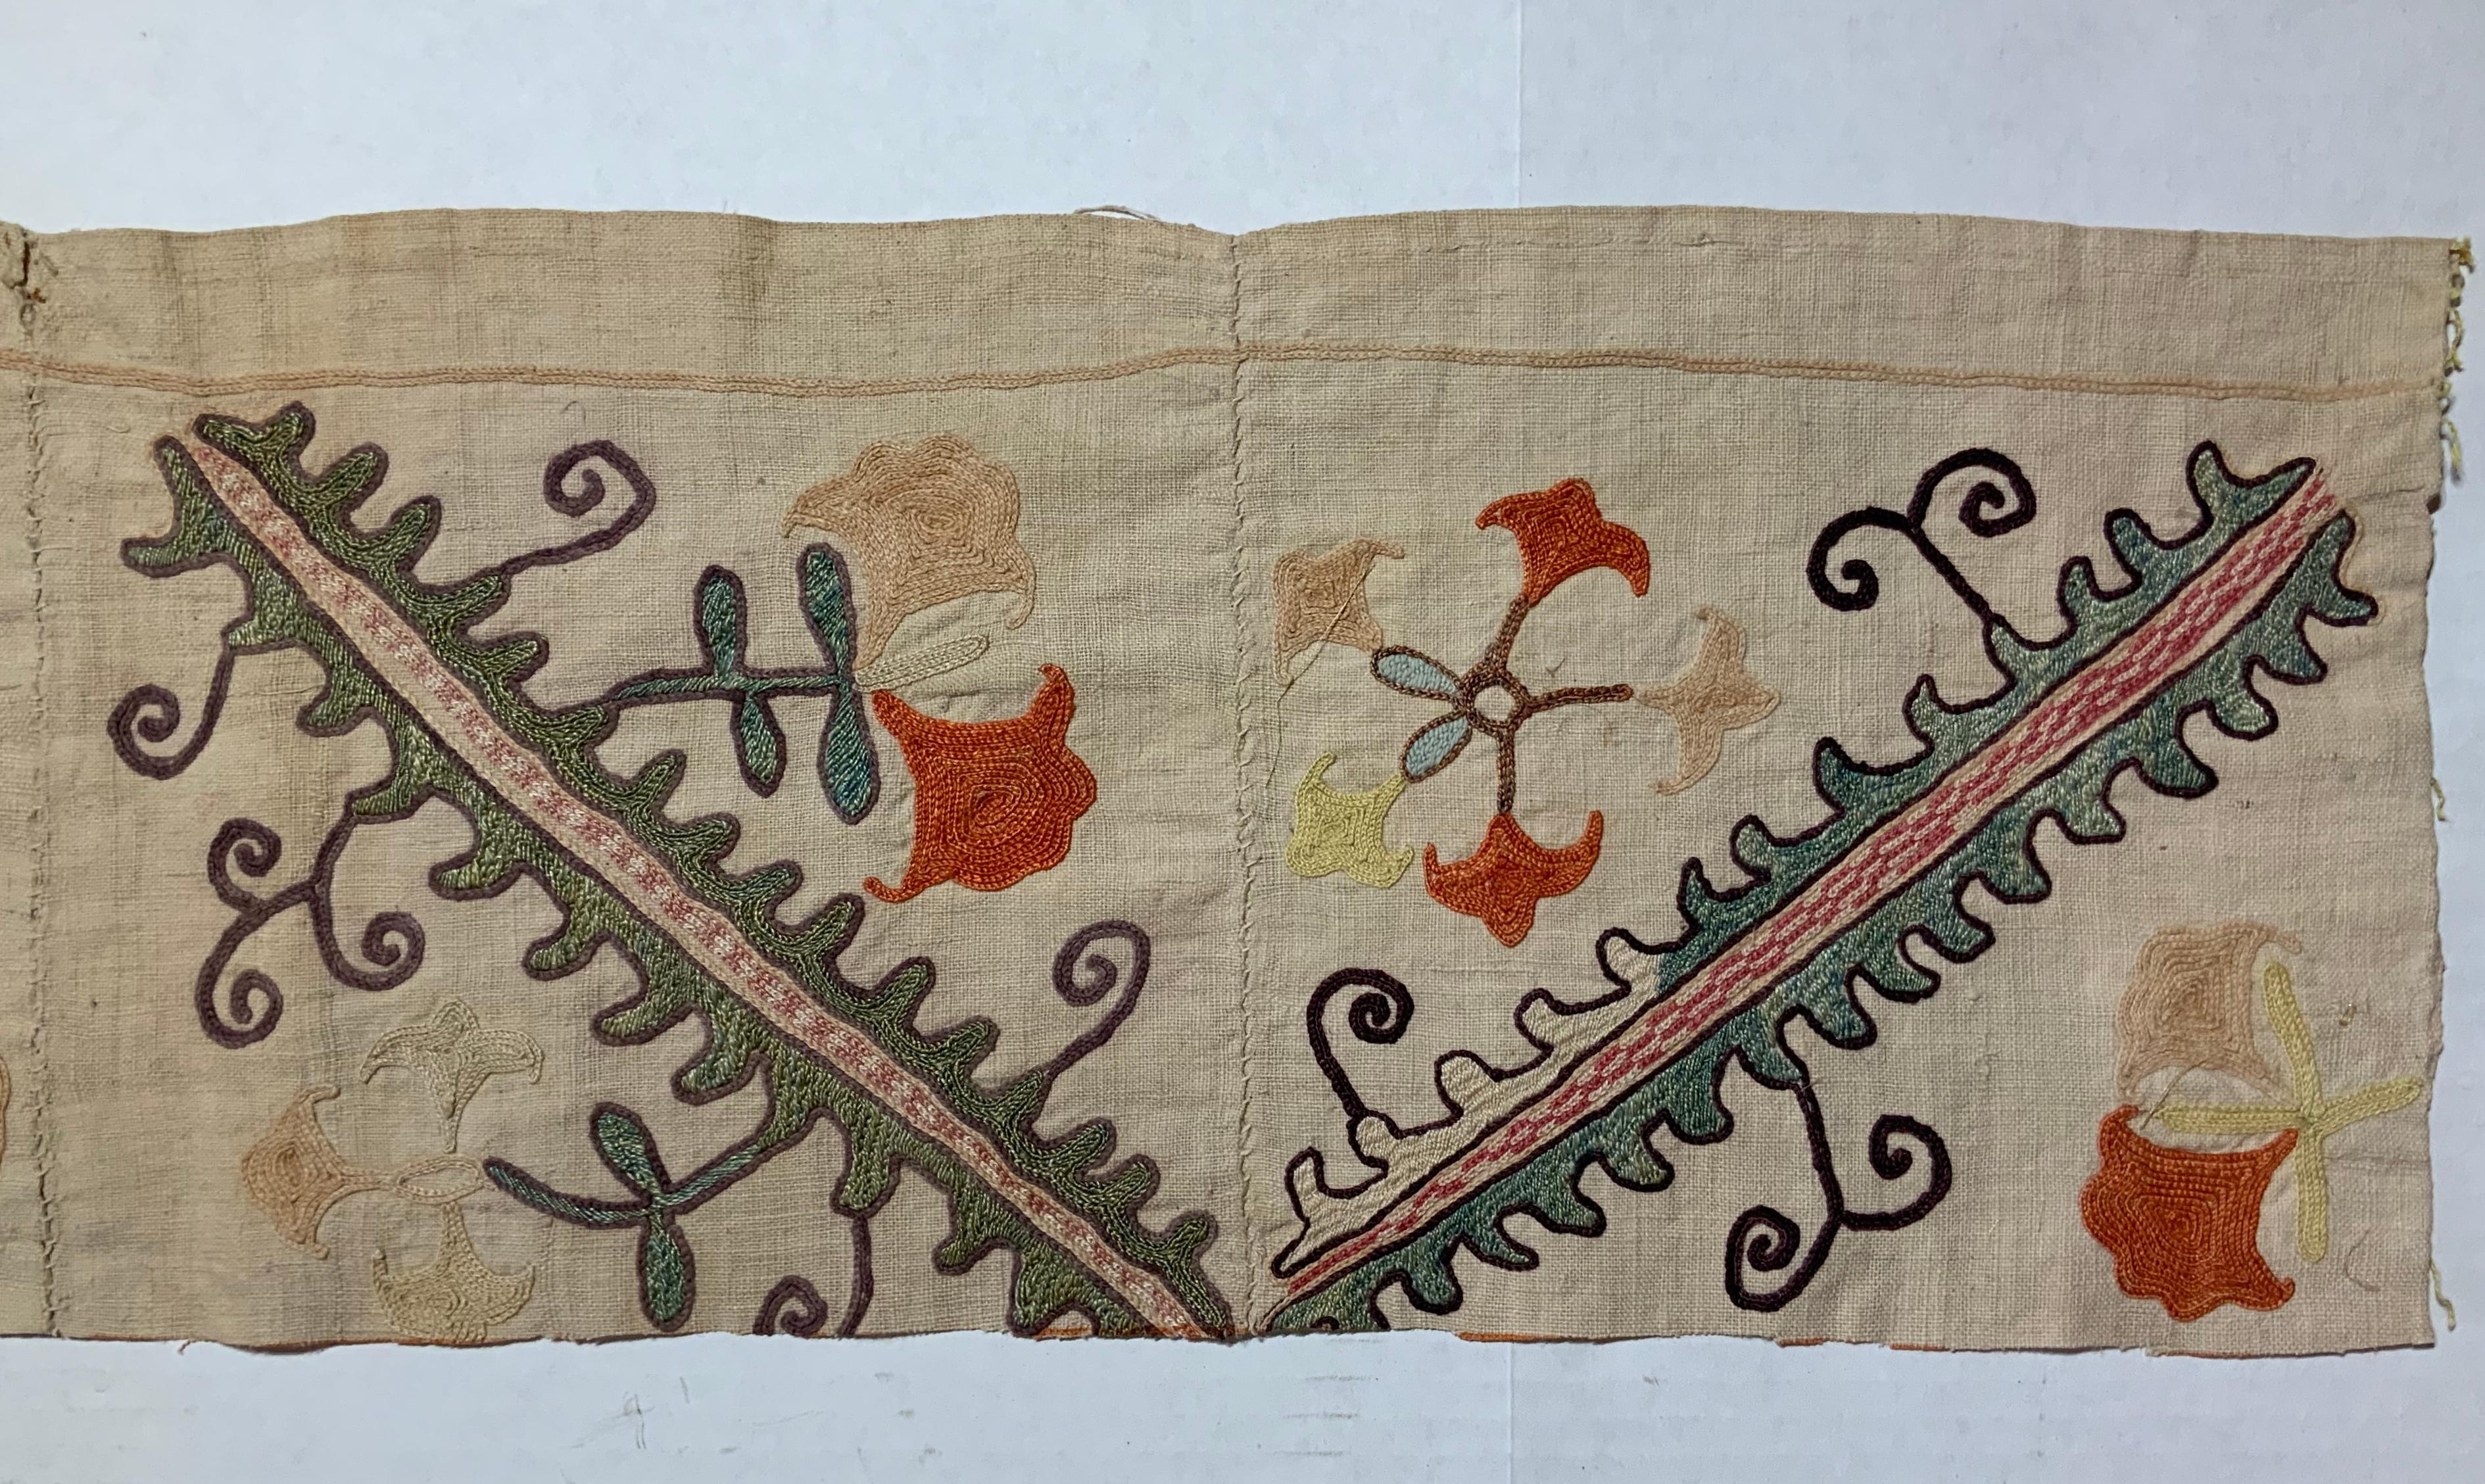 Antique Suzani fragment made of hand embroidery intricate scrolling vines and flowers motifs on a handwoven cotton background.
This piece has some spots and fading areas, some small tears, some oxidization due to age but still has a good structural